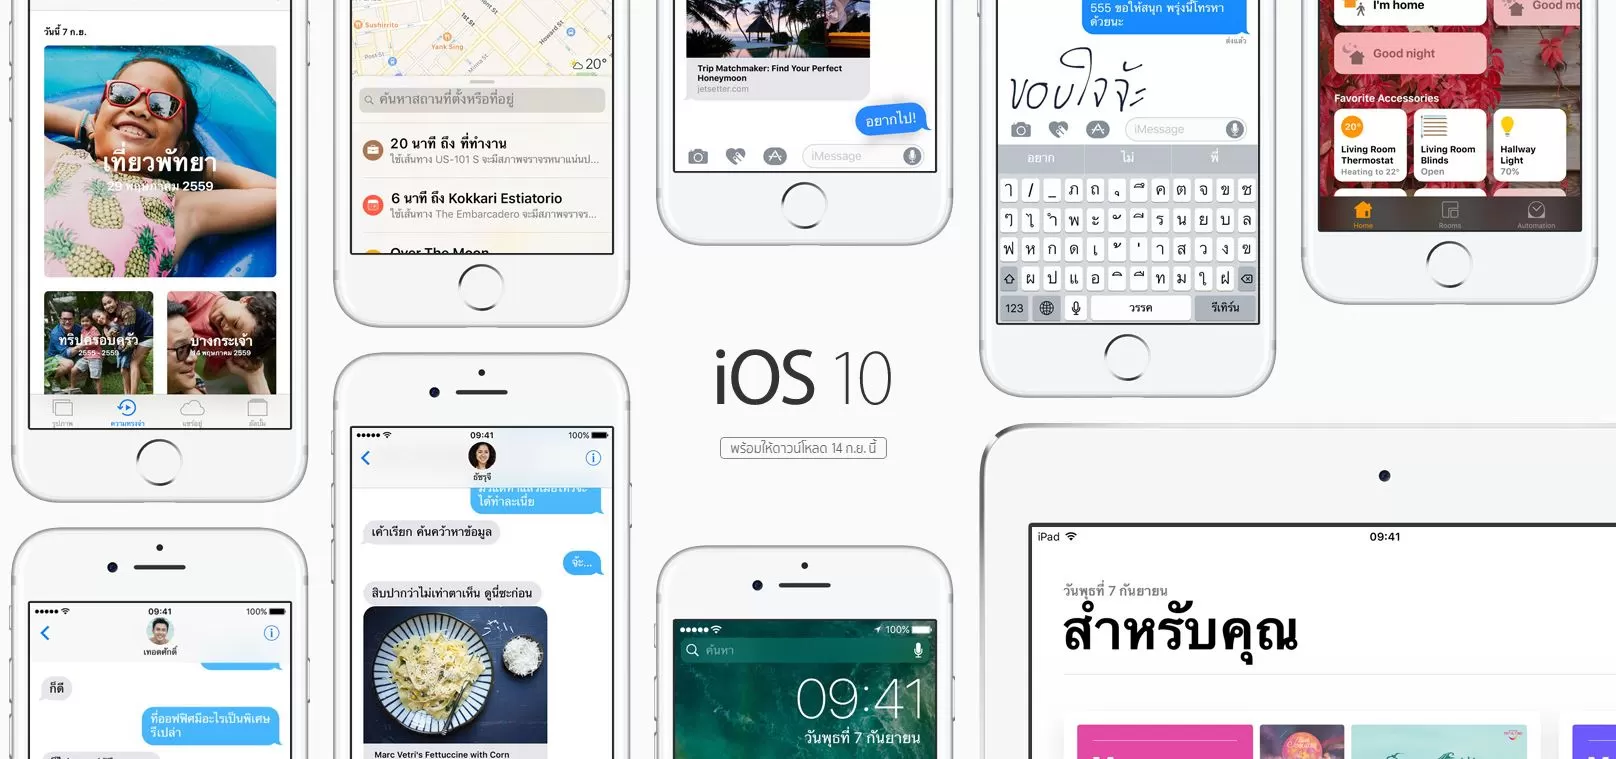 ios10 official update available